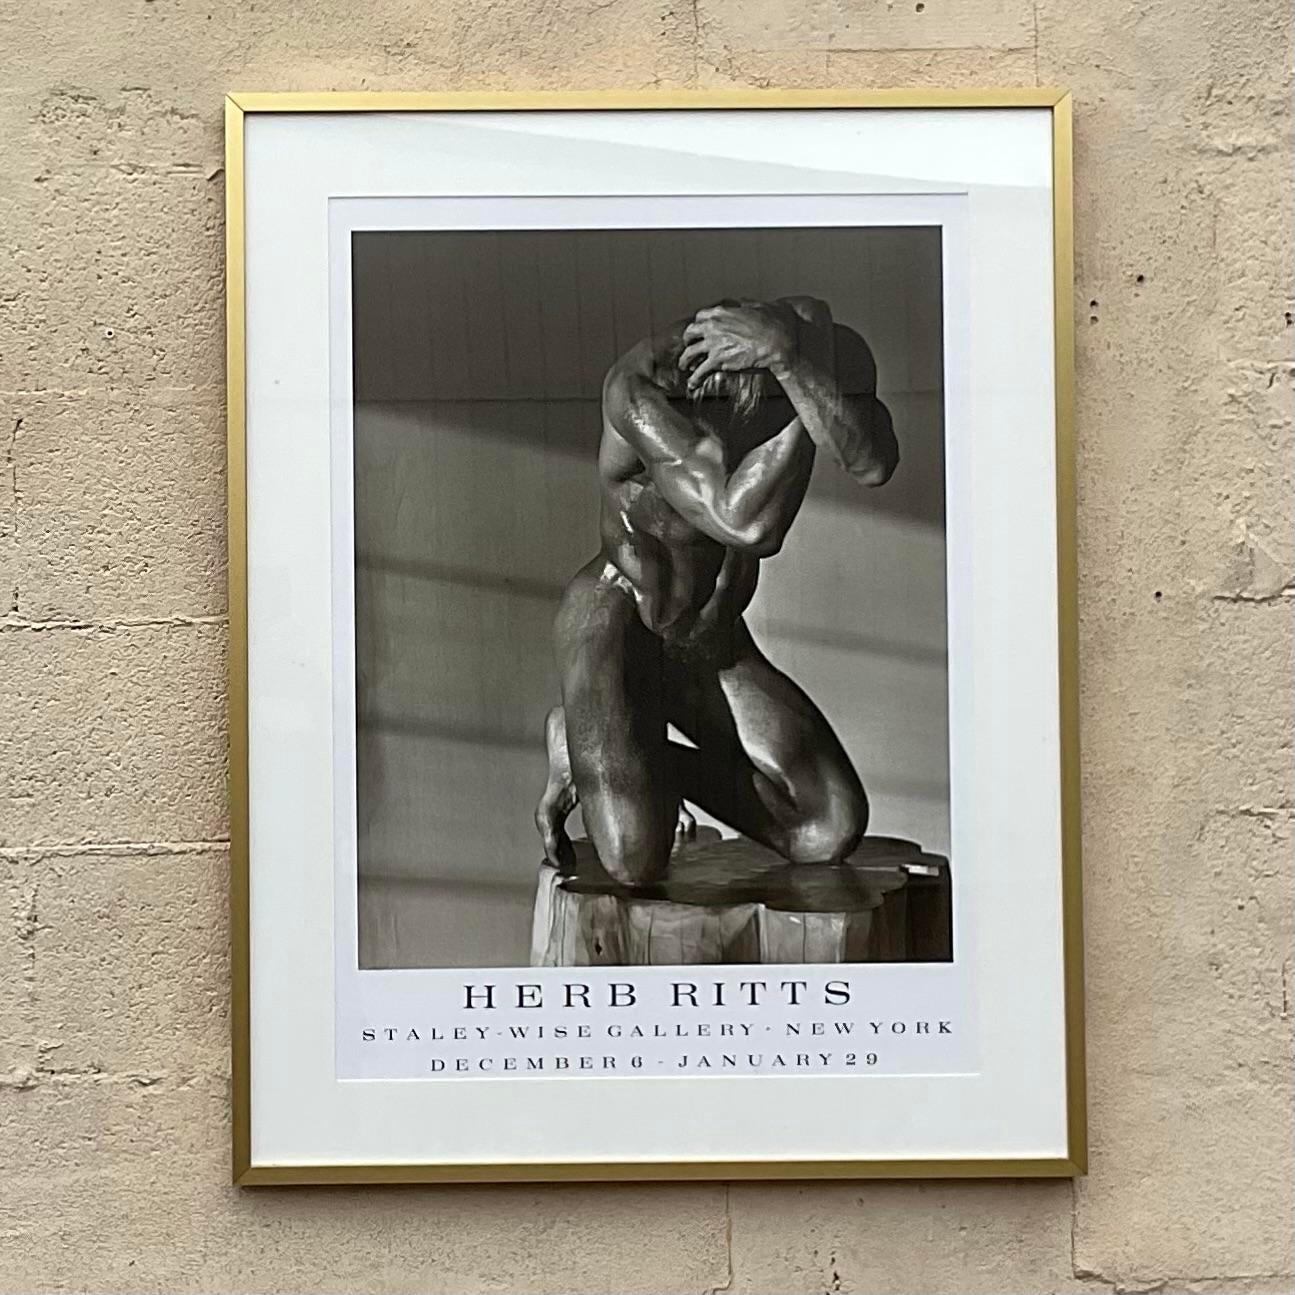 North American Vintage Boho Herb Ritts Staley Wise Gallery Show Poster For Sale